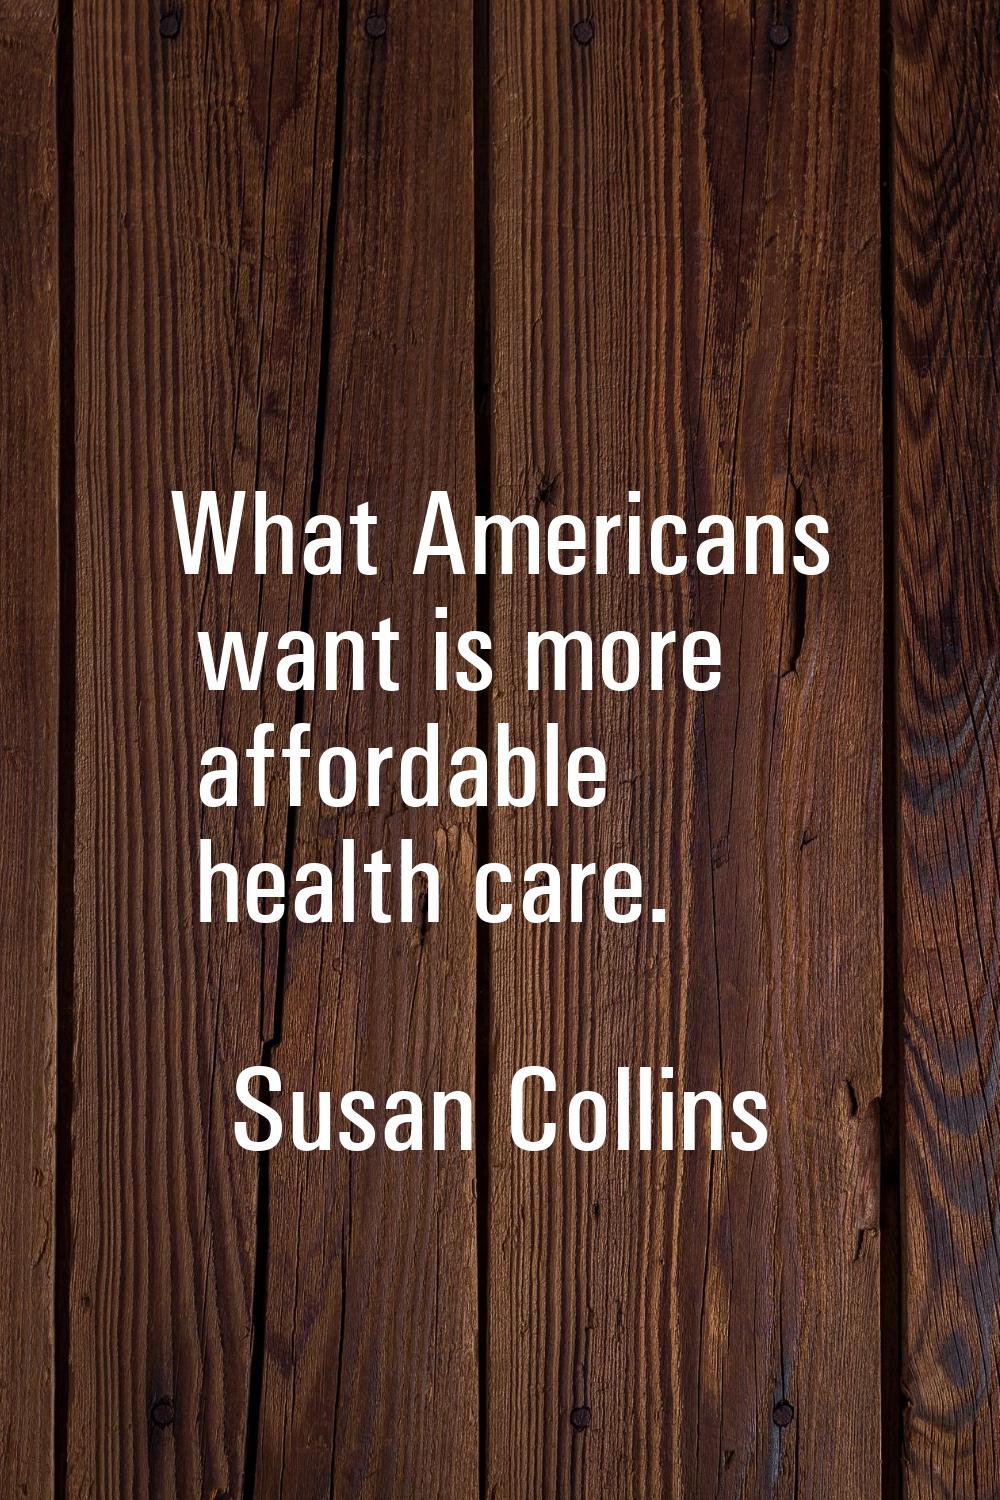 What Americans want is more affordable health care.